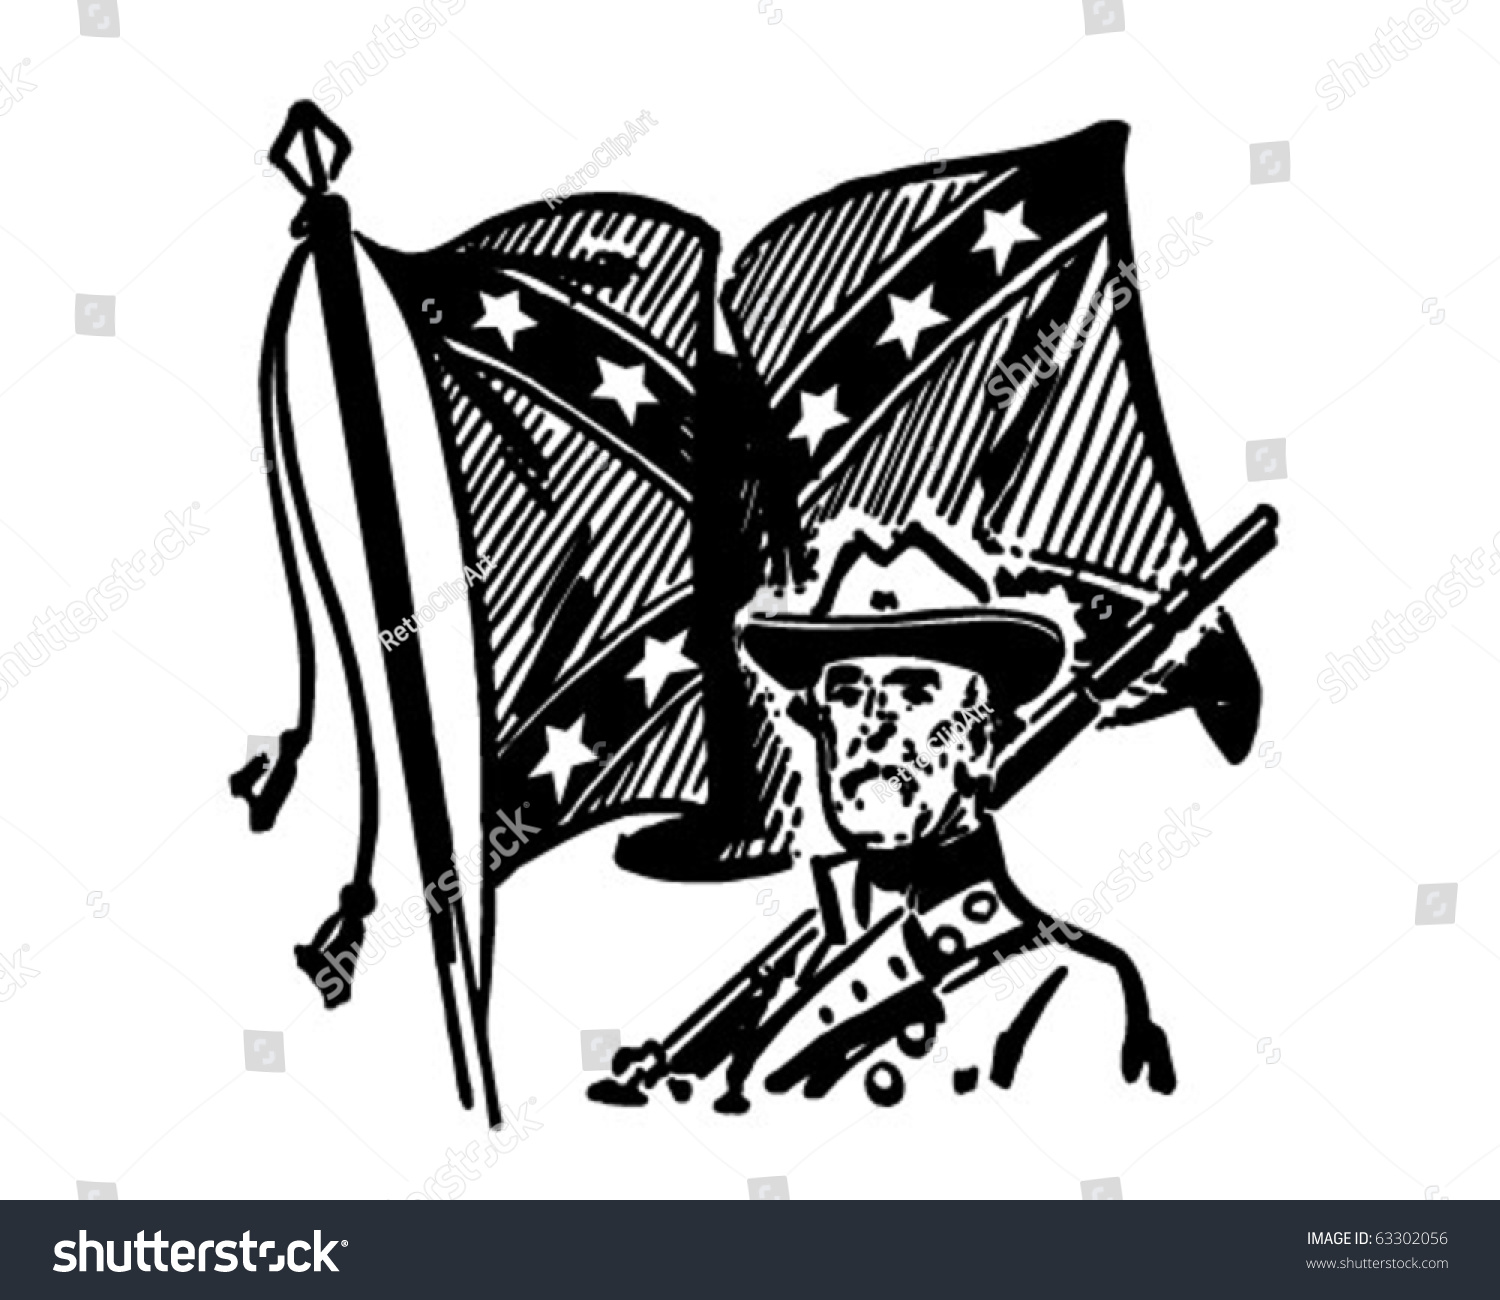 SVG of Confederate With Flag - Retro Clipart Illustration svg